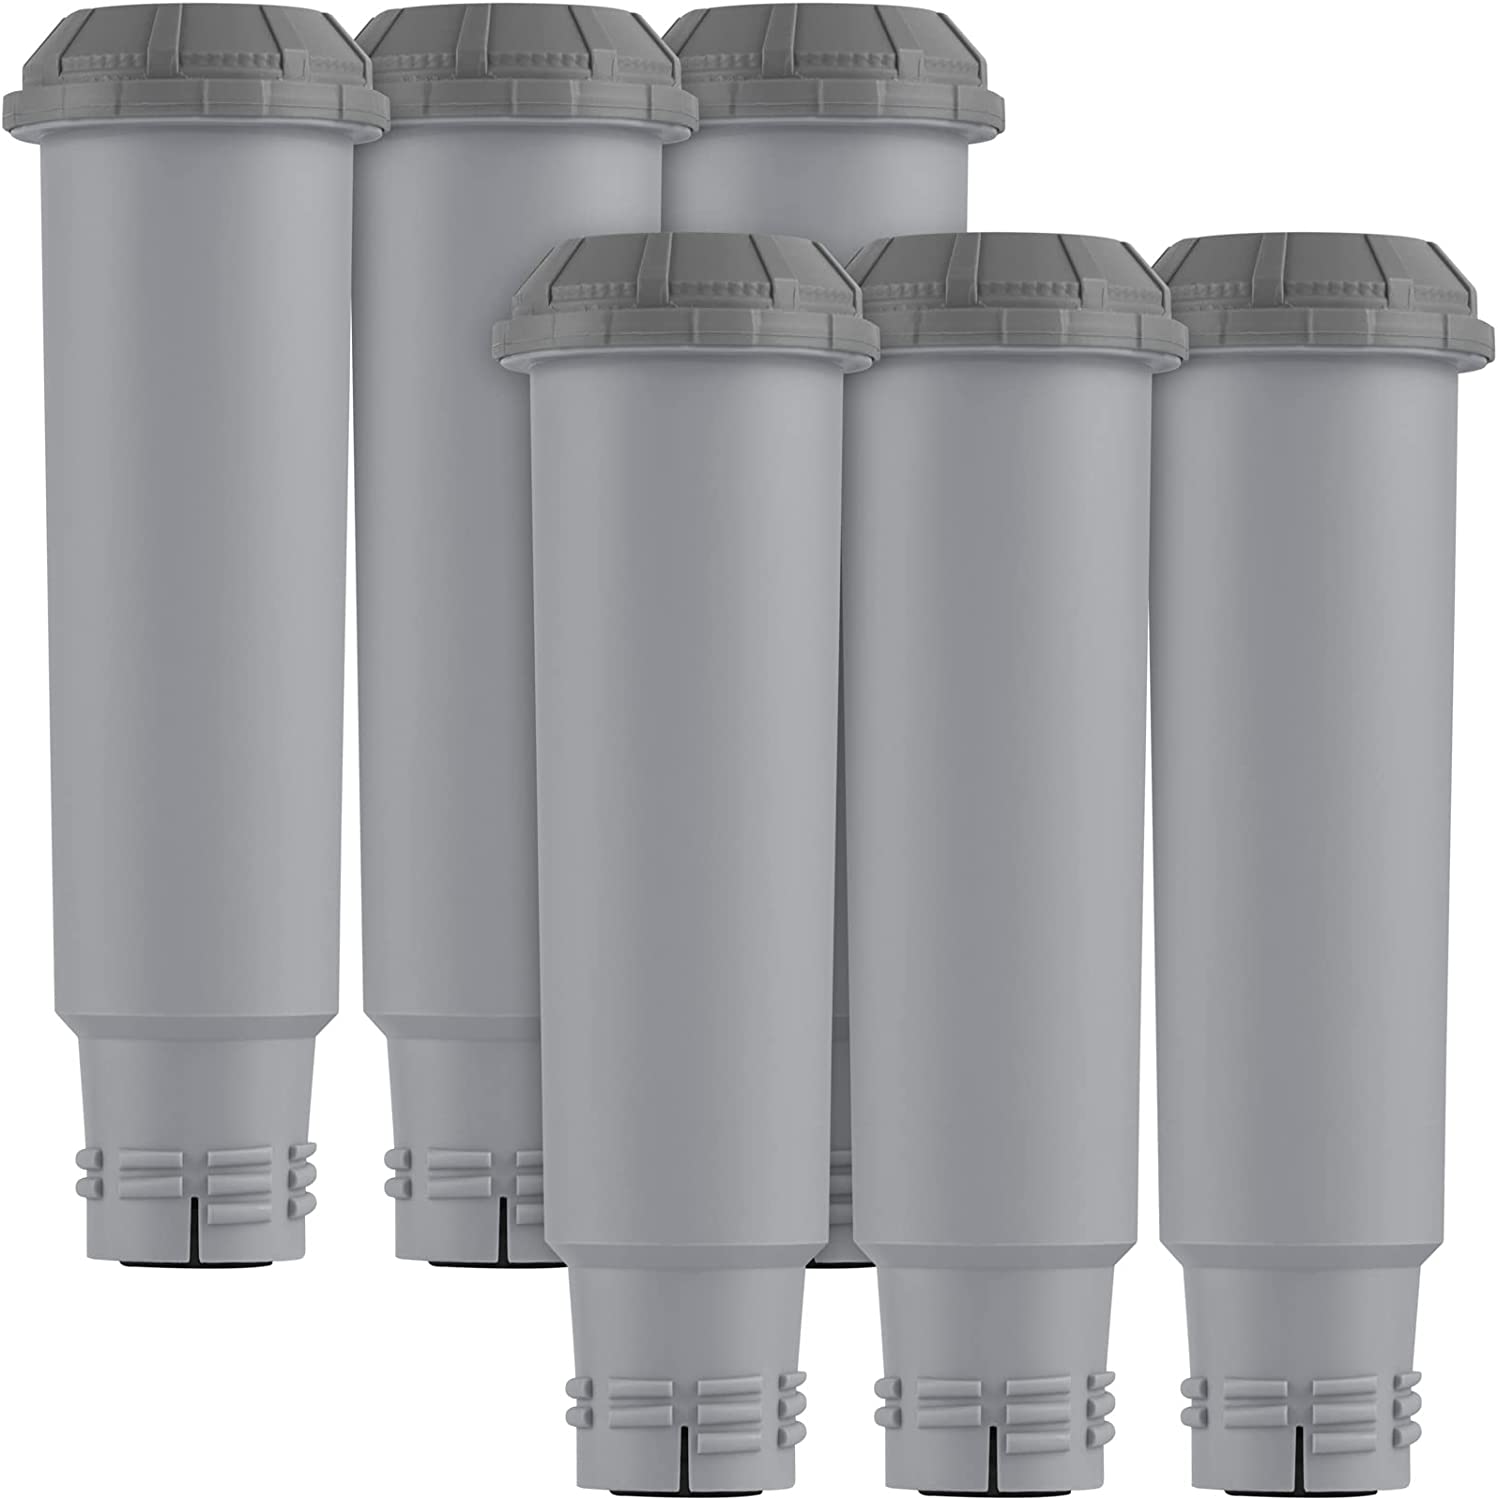 VIOLO 6 x coffee machine water filter, replacement compatible with Krups, Bosch, Siemens, PZH approval, softens water, improves taste, removes chlorine and heavy metals